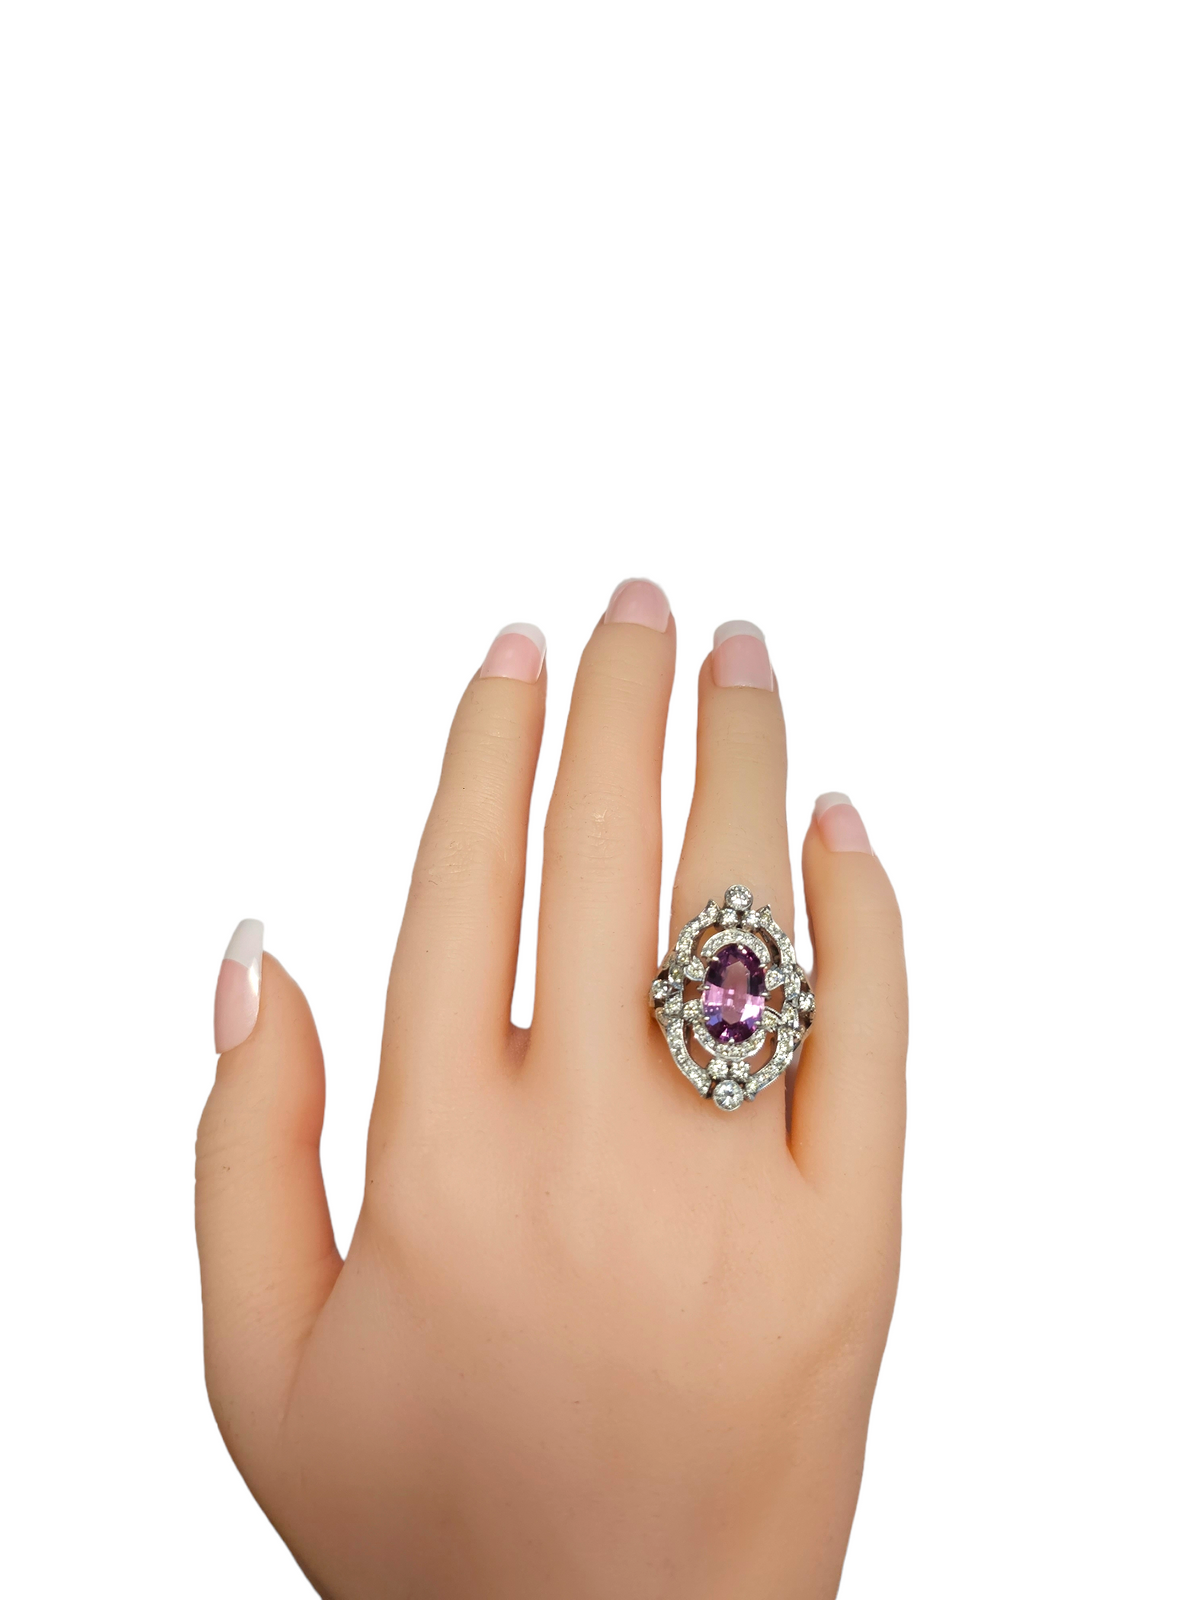 18Kt White Gold Pink Spinel and Diamond Ring